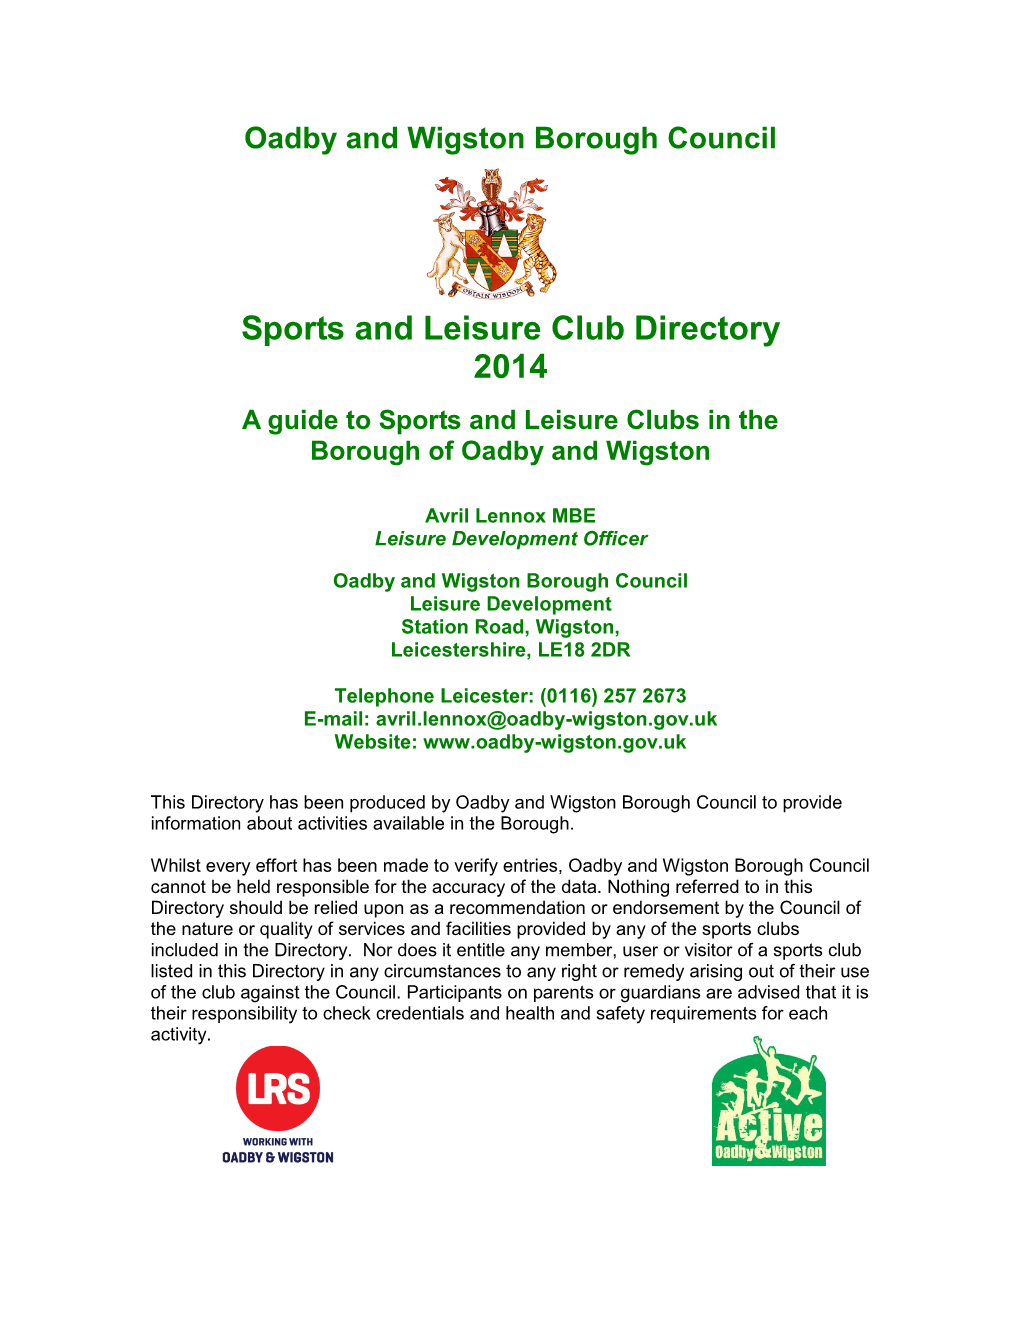 Sports and Leisure Club Directory 2014